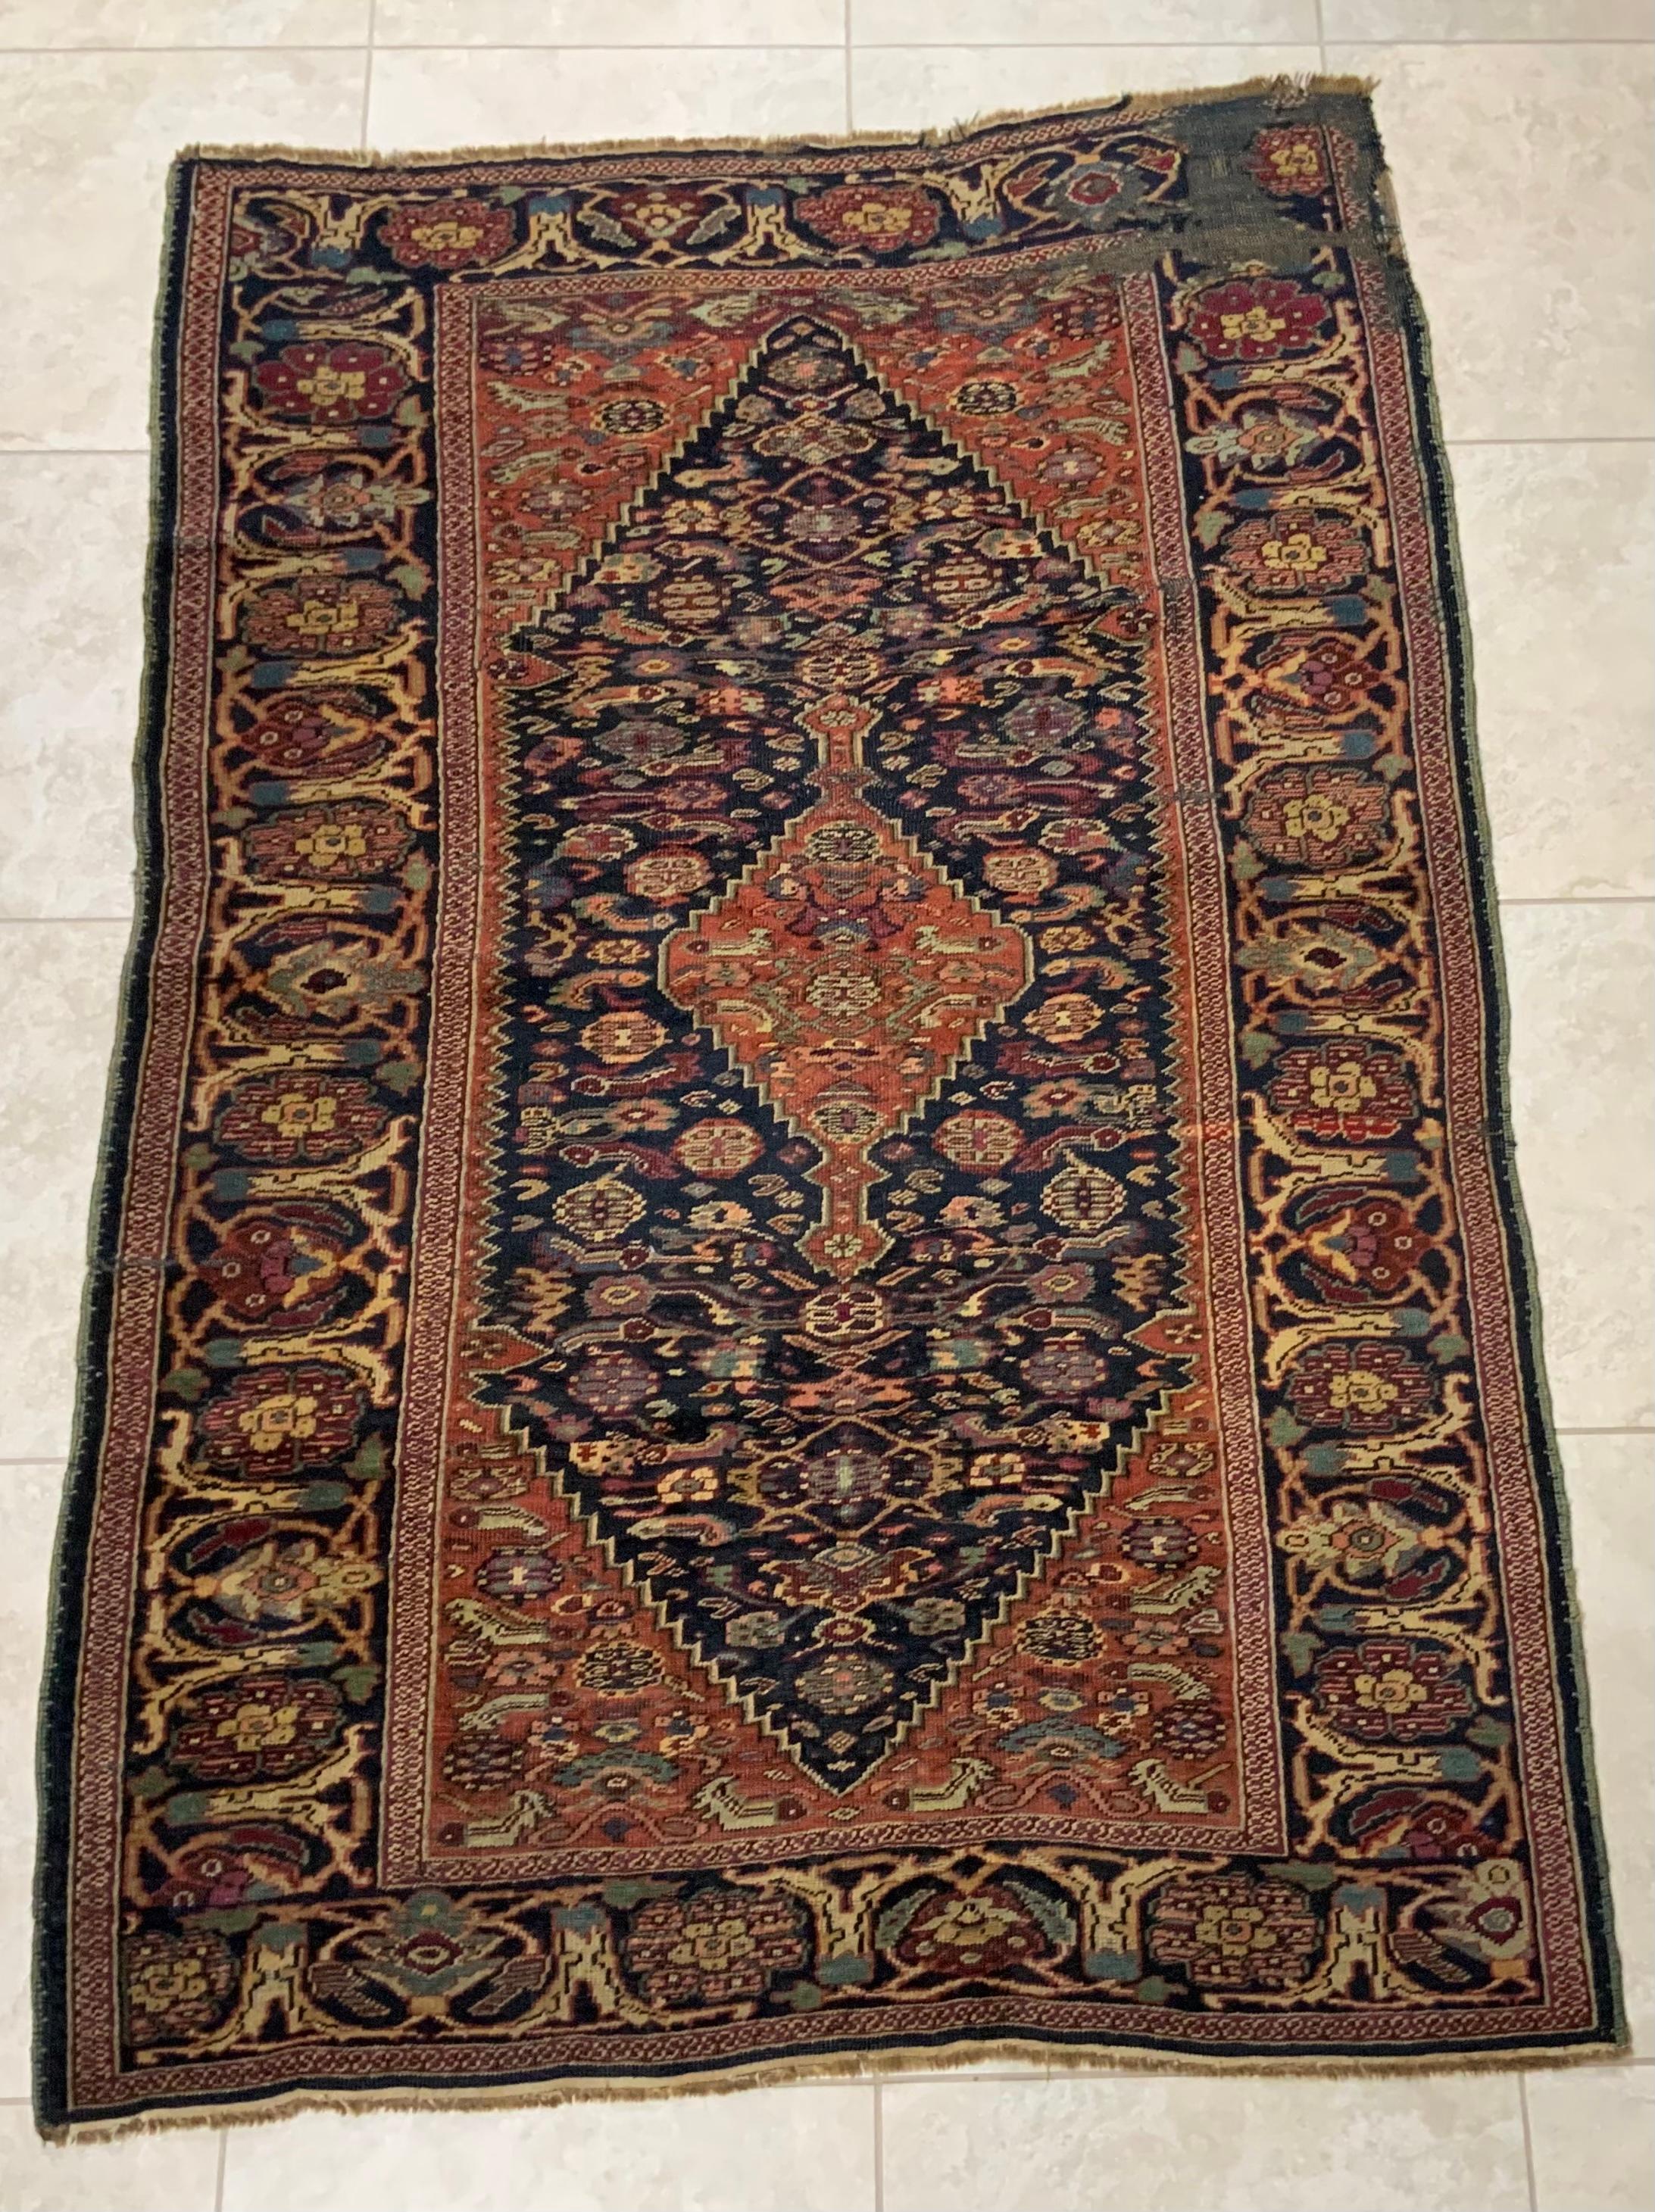 Exceptional oriental rug made of fine wool with beautifully executed geometric and floral motifs, beautiful small and medium medallions surrounded by intricate wide Border. The rug handwoven by nomadic family. In one corner area missing and low pile